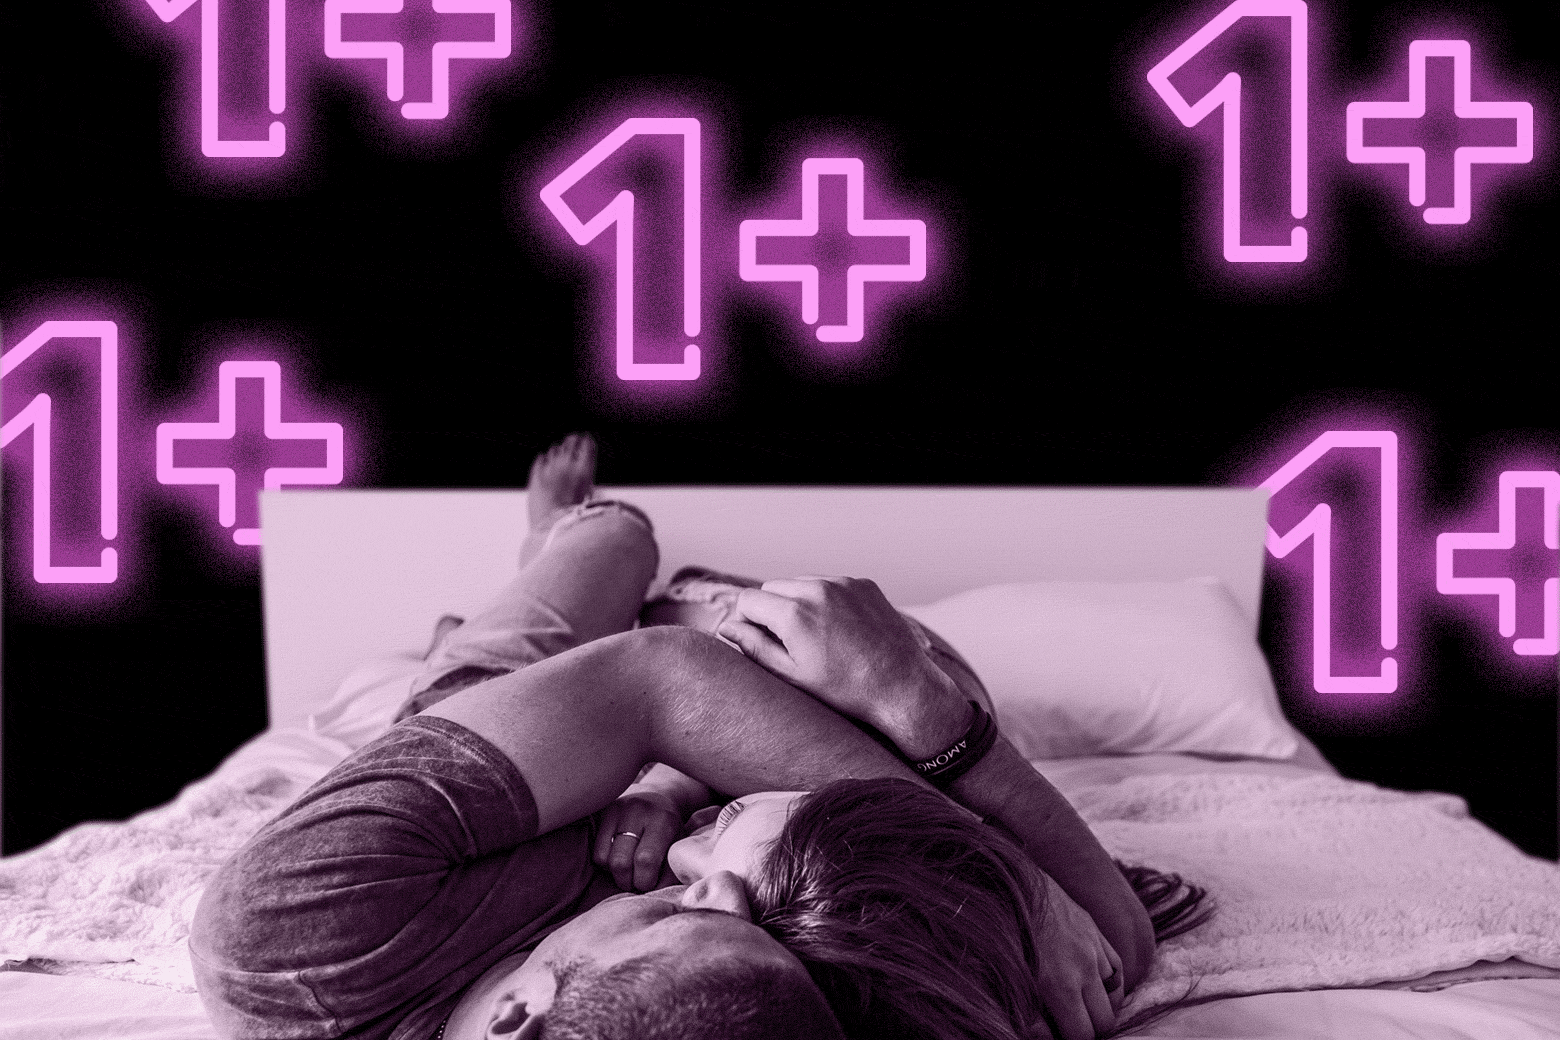 A man and woman cuddle in bed. There are neon 1+ symbols behind them.